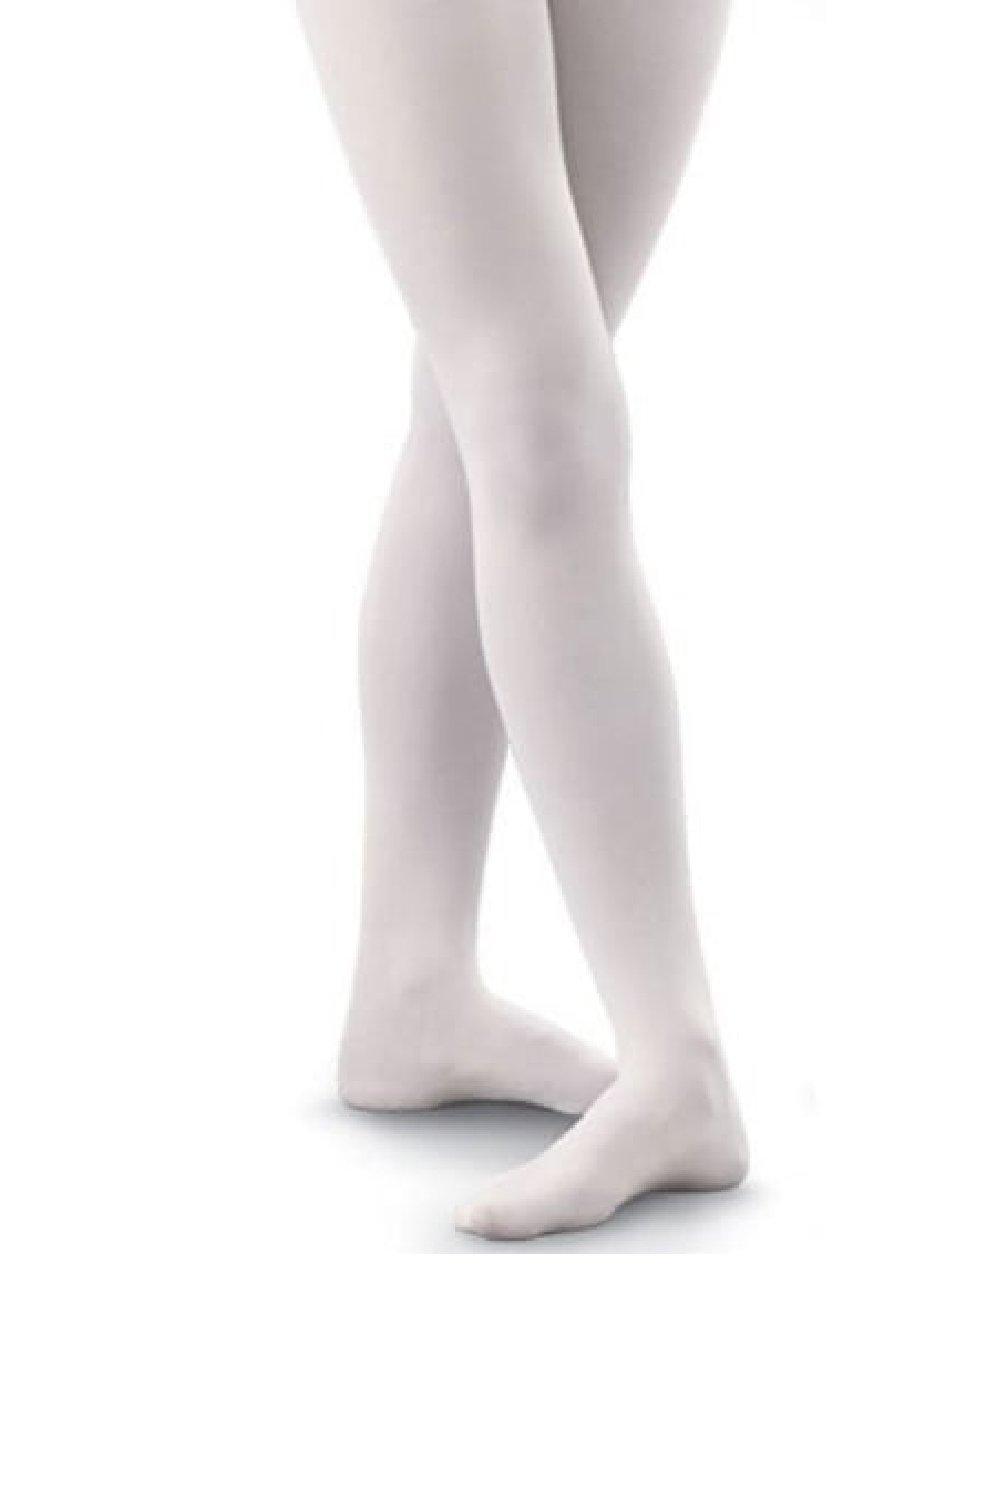 1 Pair Soft Footed Ballet Tights for